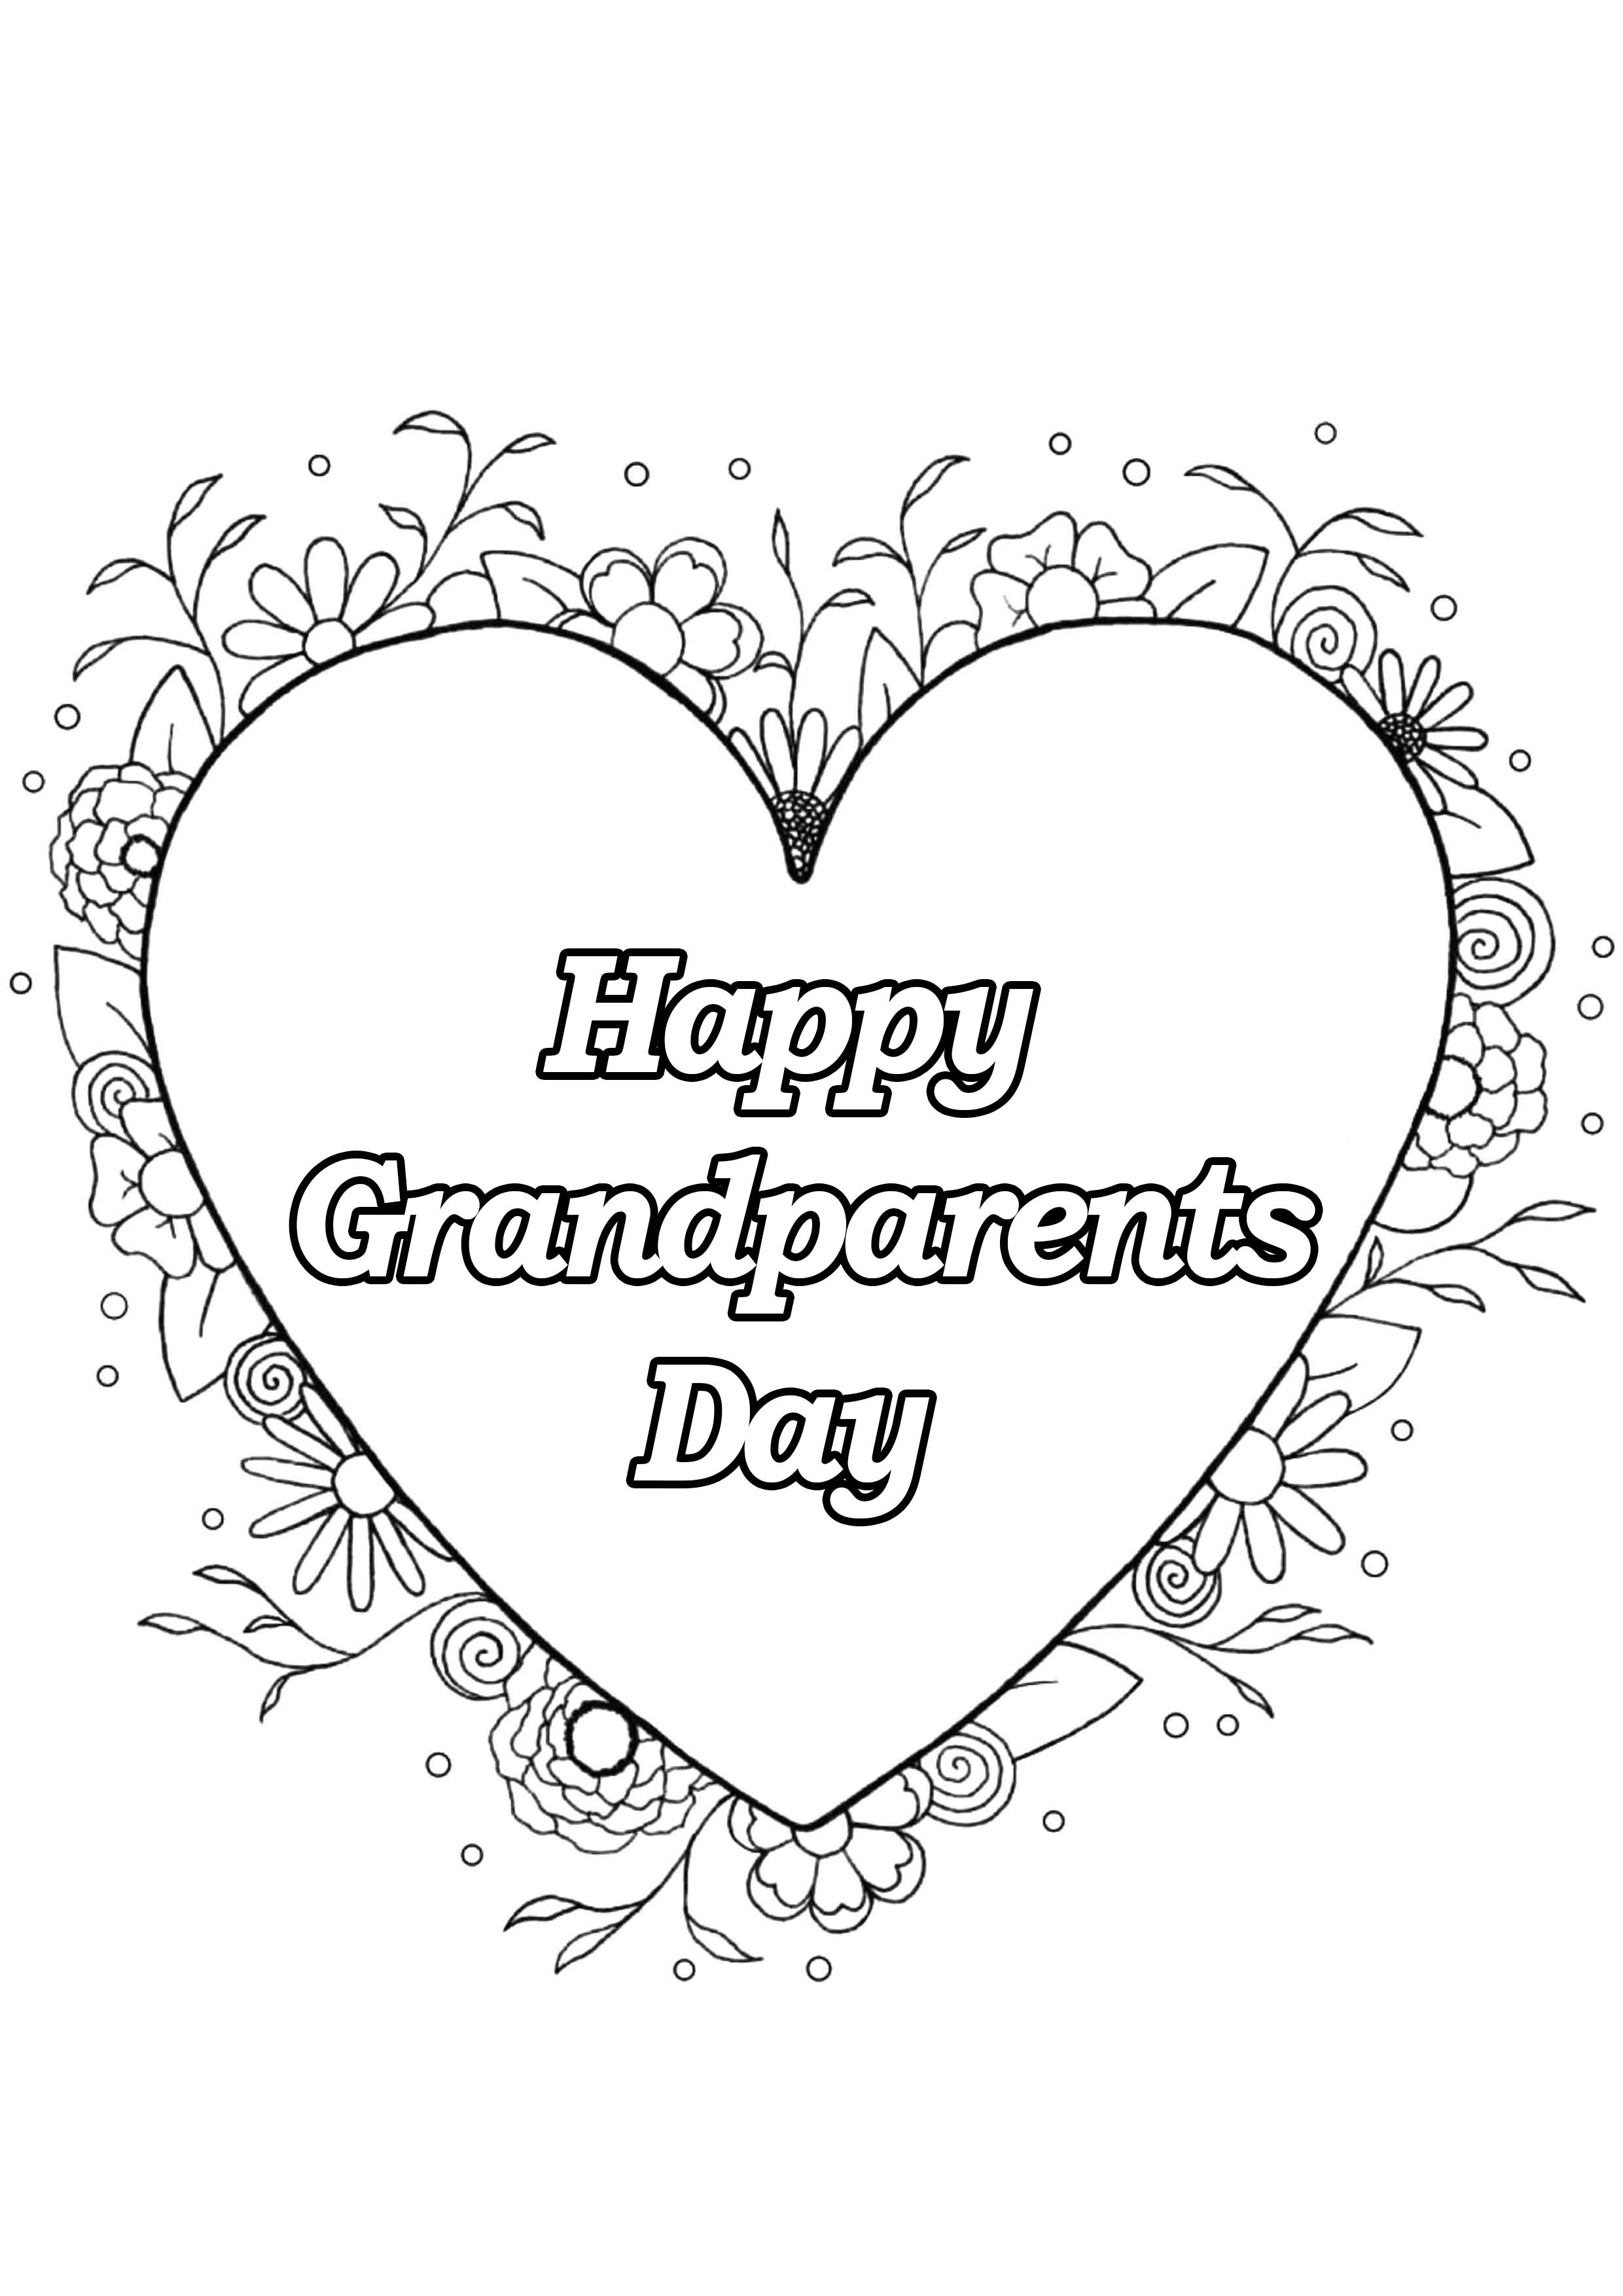 Grandparents day coloring page : Heart & Flowers, Artist : Louise